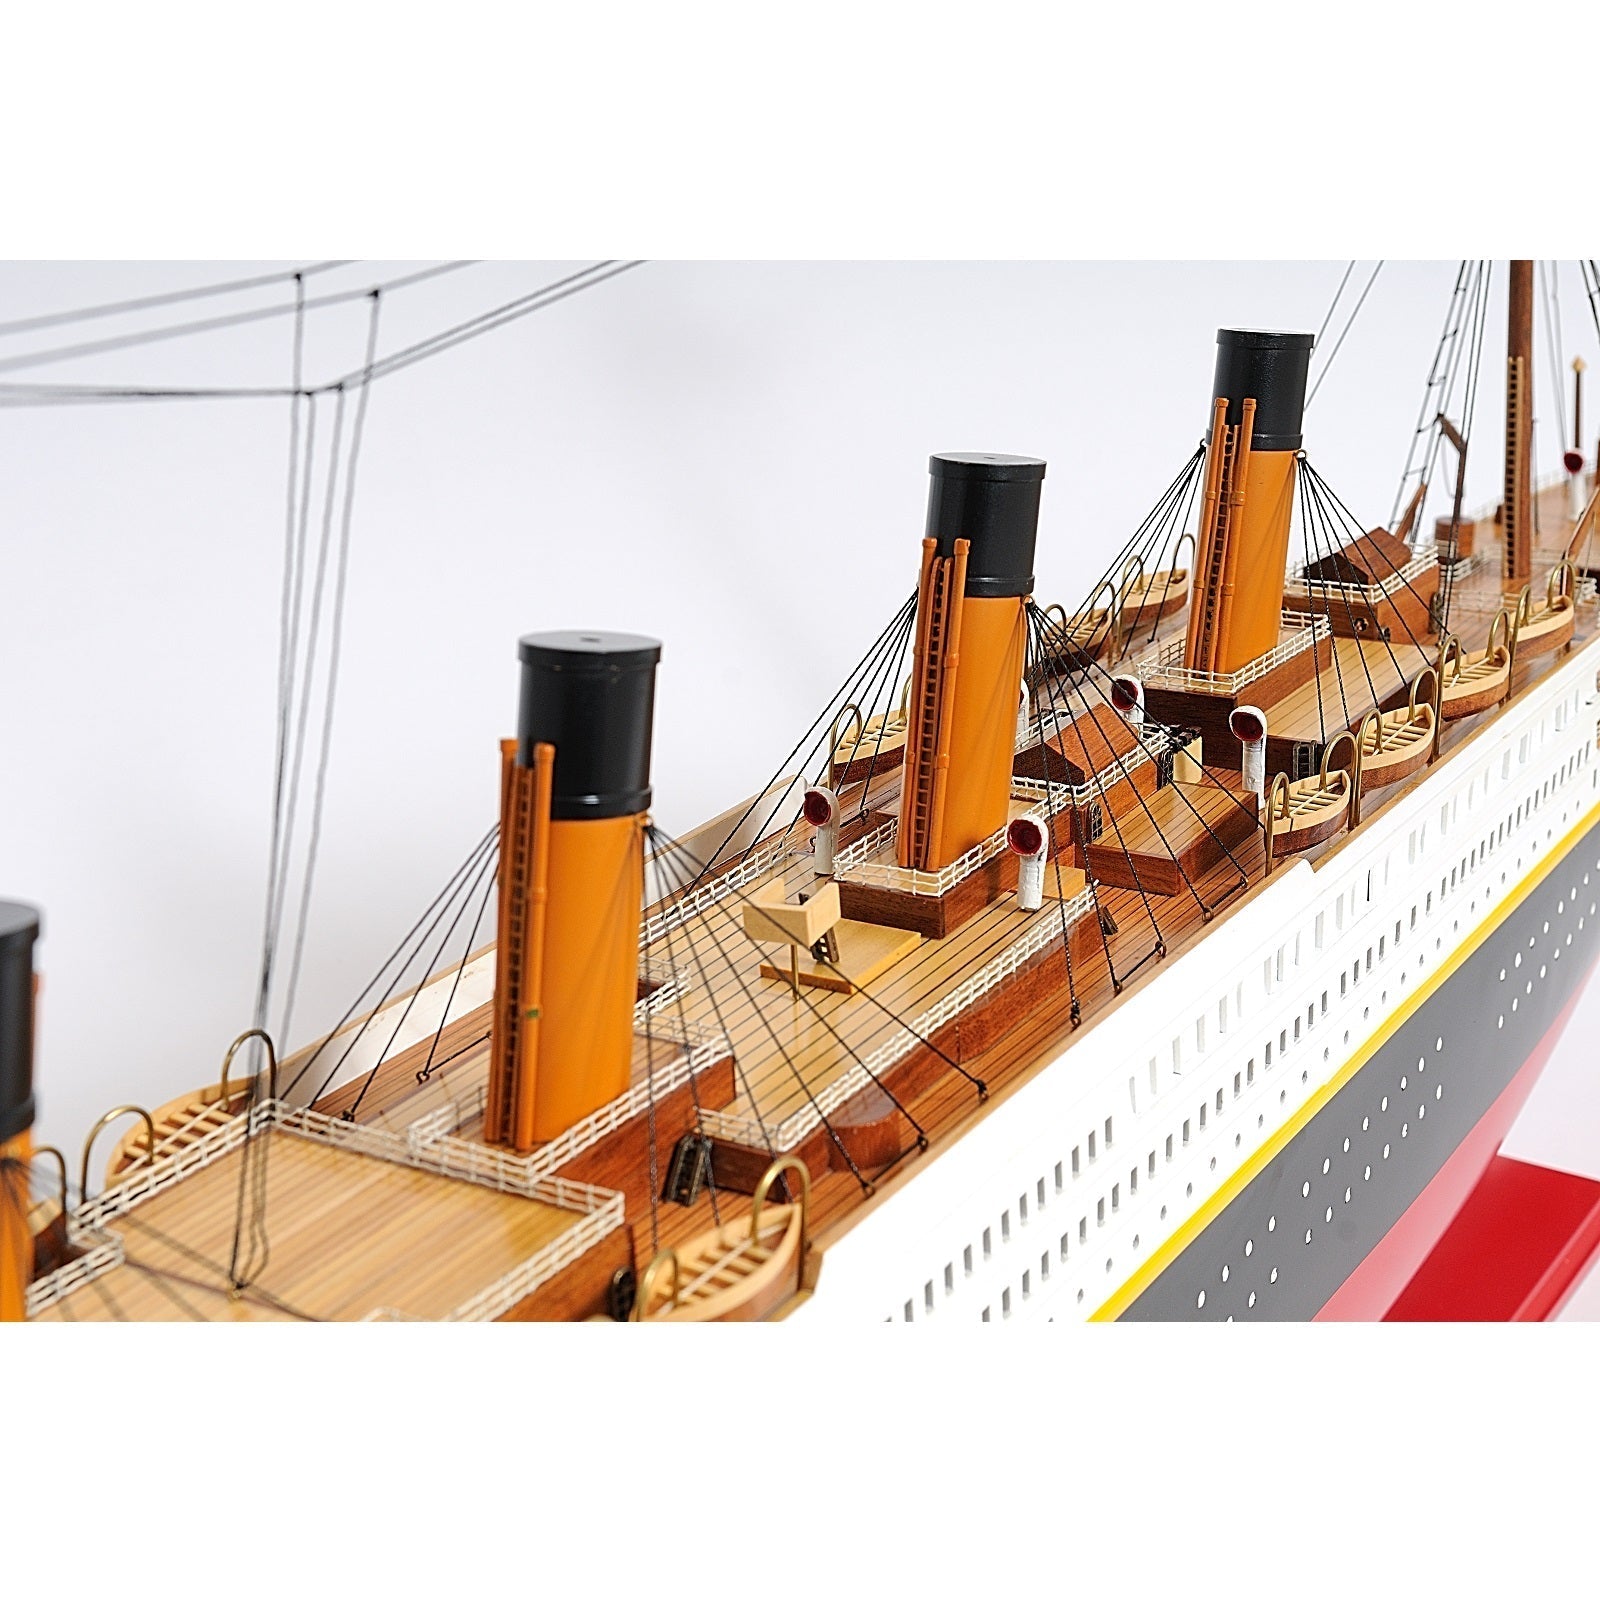 Titanic Painted XL, Fully Assembled - Micro - Mark Pre - Built